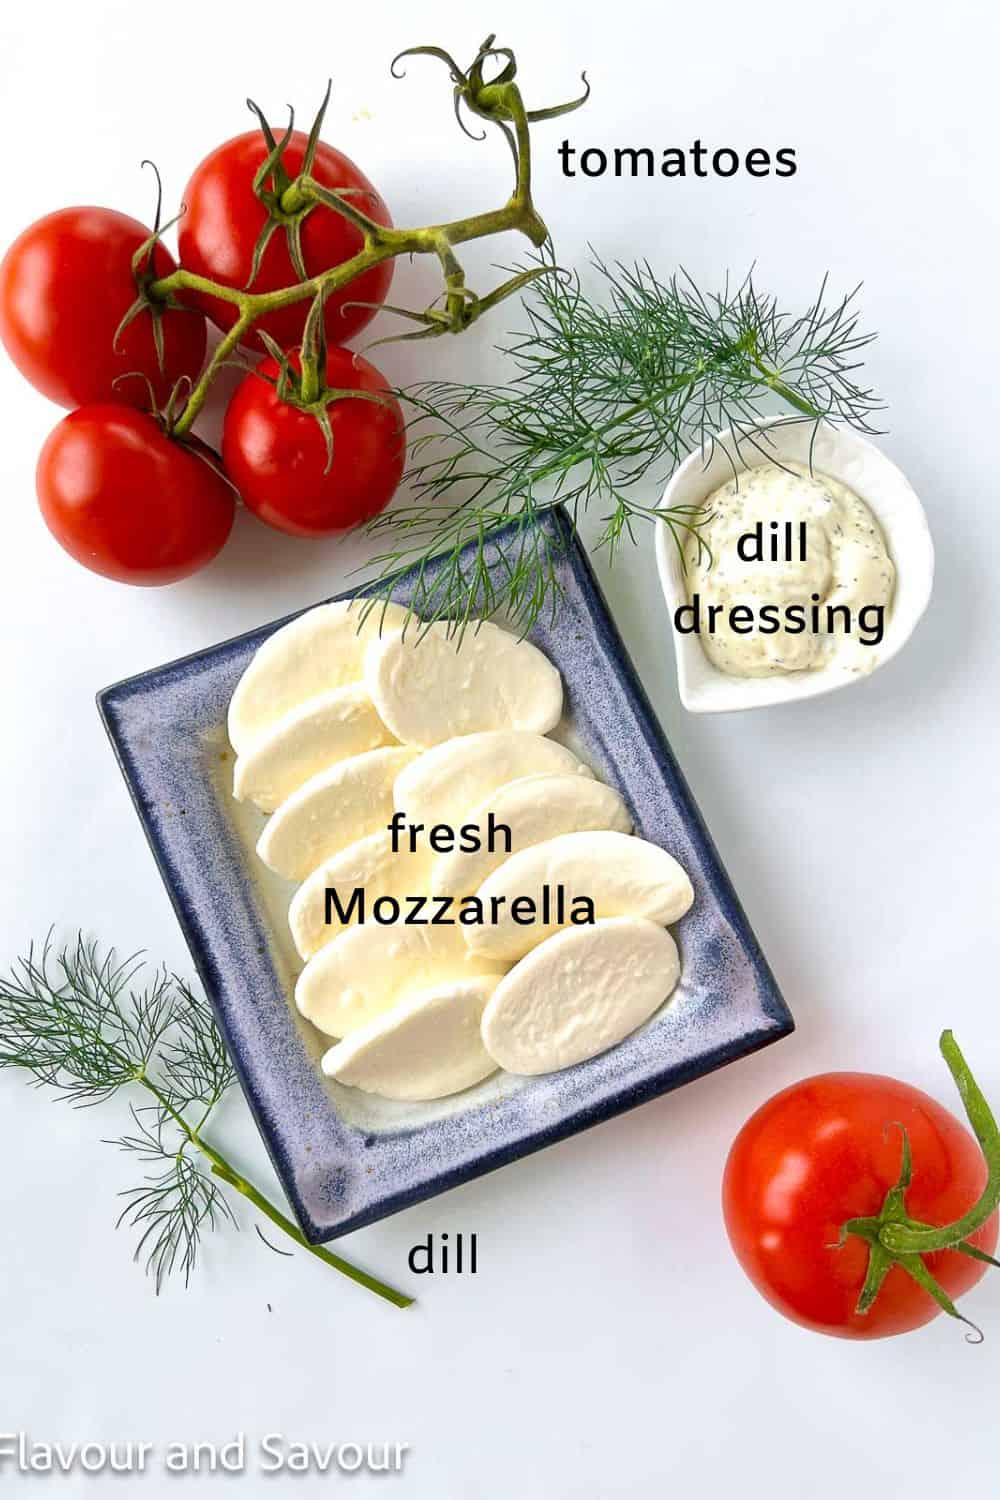 Labelled ingredients for Dill Caprese Salad: tomatoes, dill dressing, and bocconcini medallions.